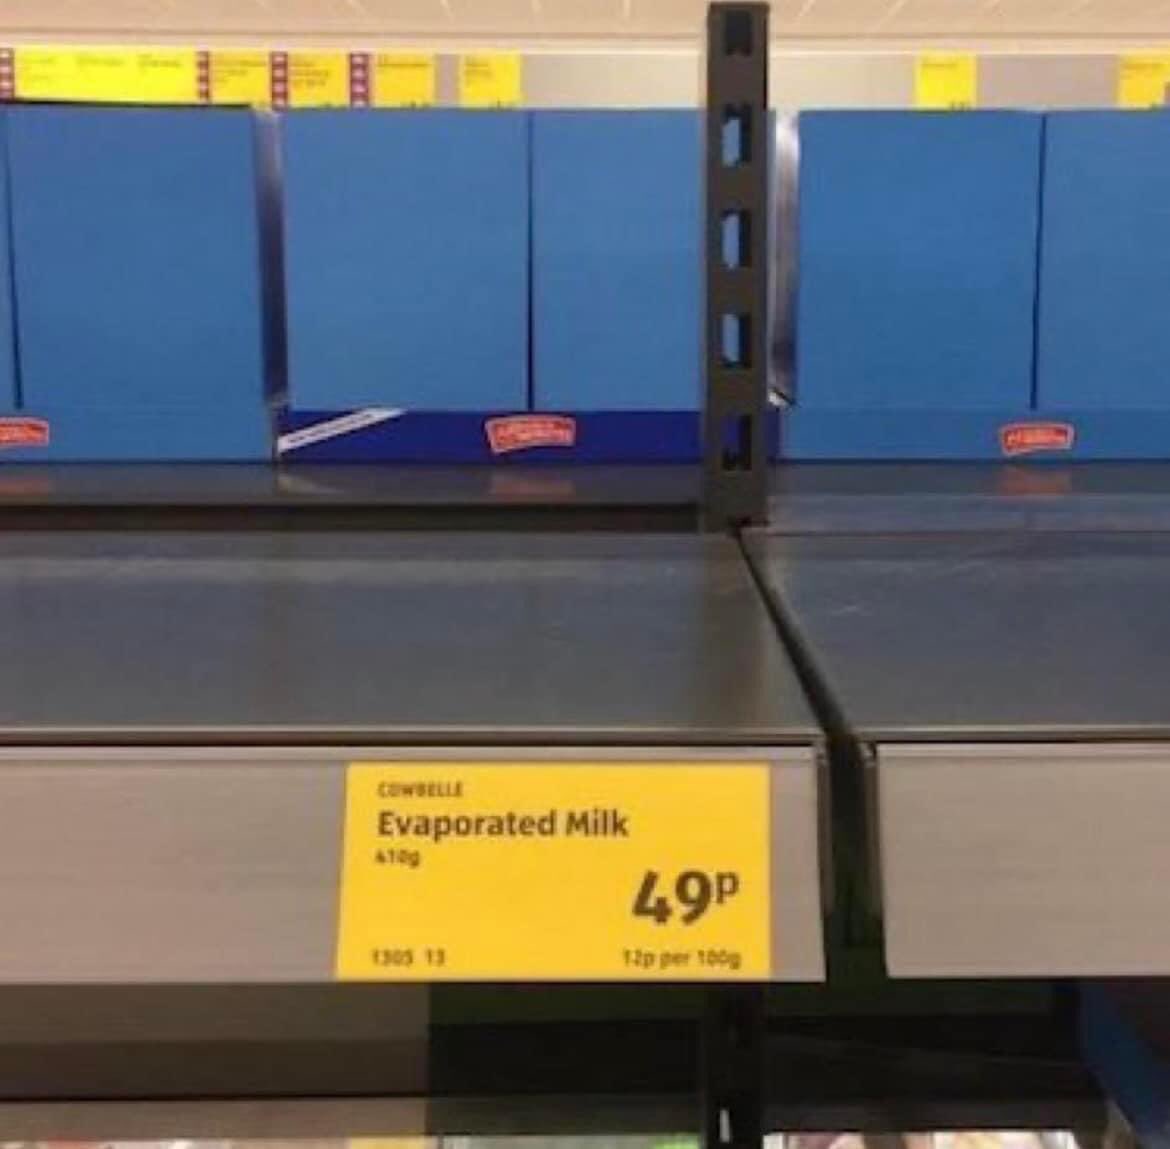 This is such a bargain! Thanks Brexit!